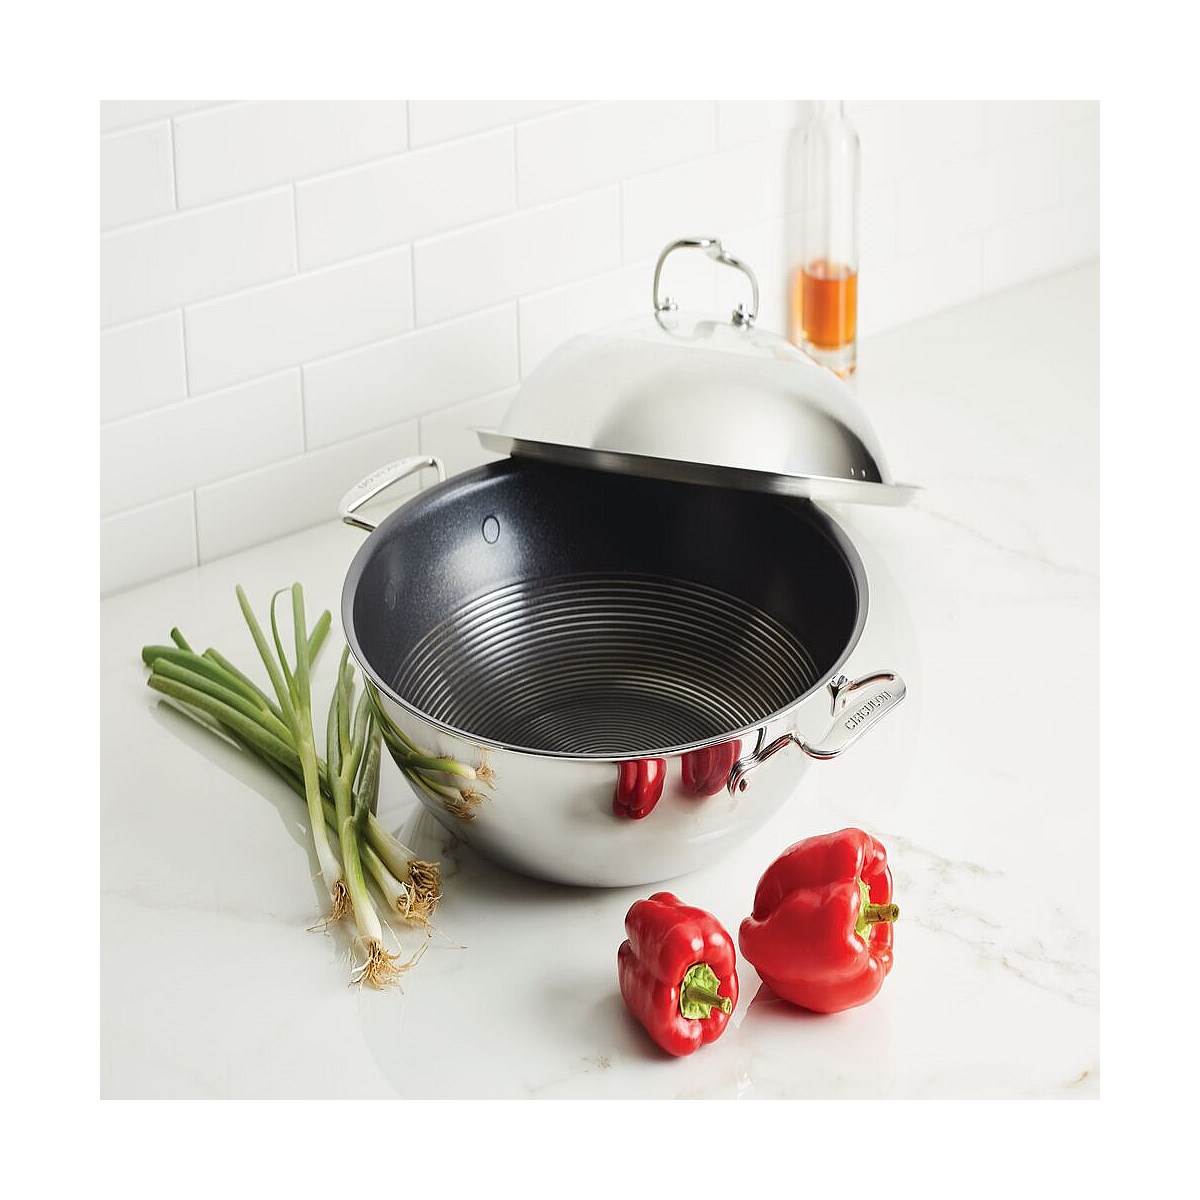 Circulon C-Series Nonstick Clad Induction Covered Wok 36cm In Stainless  Steel